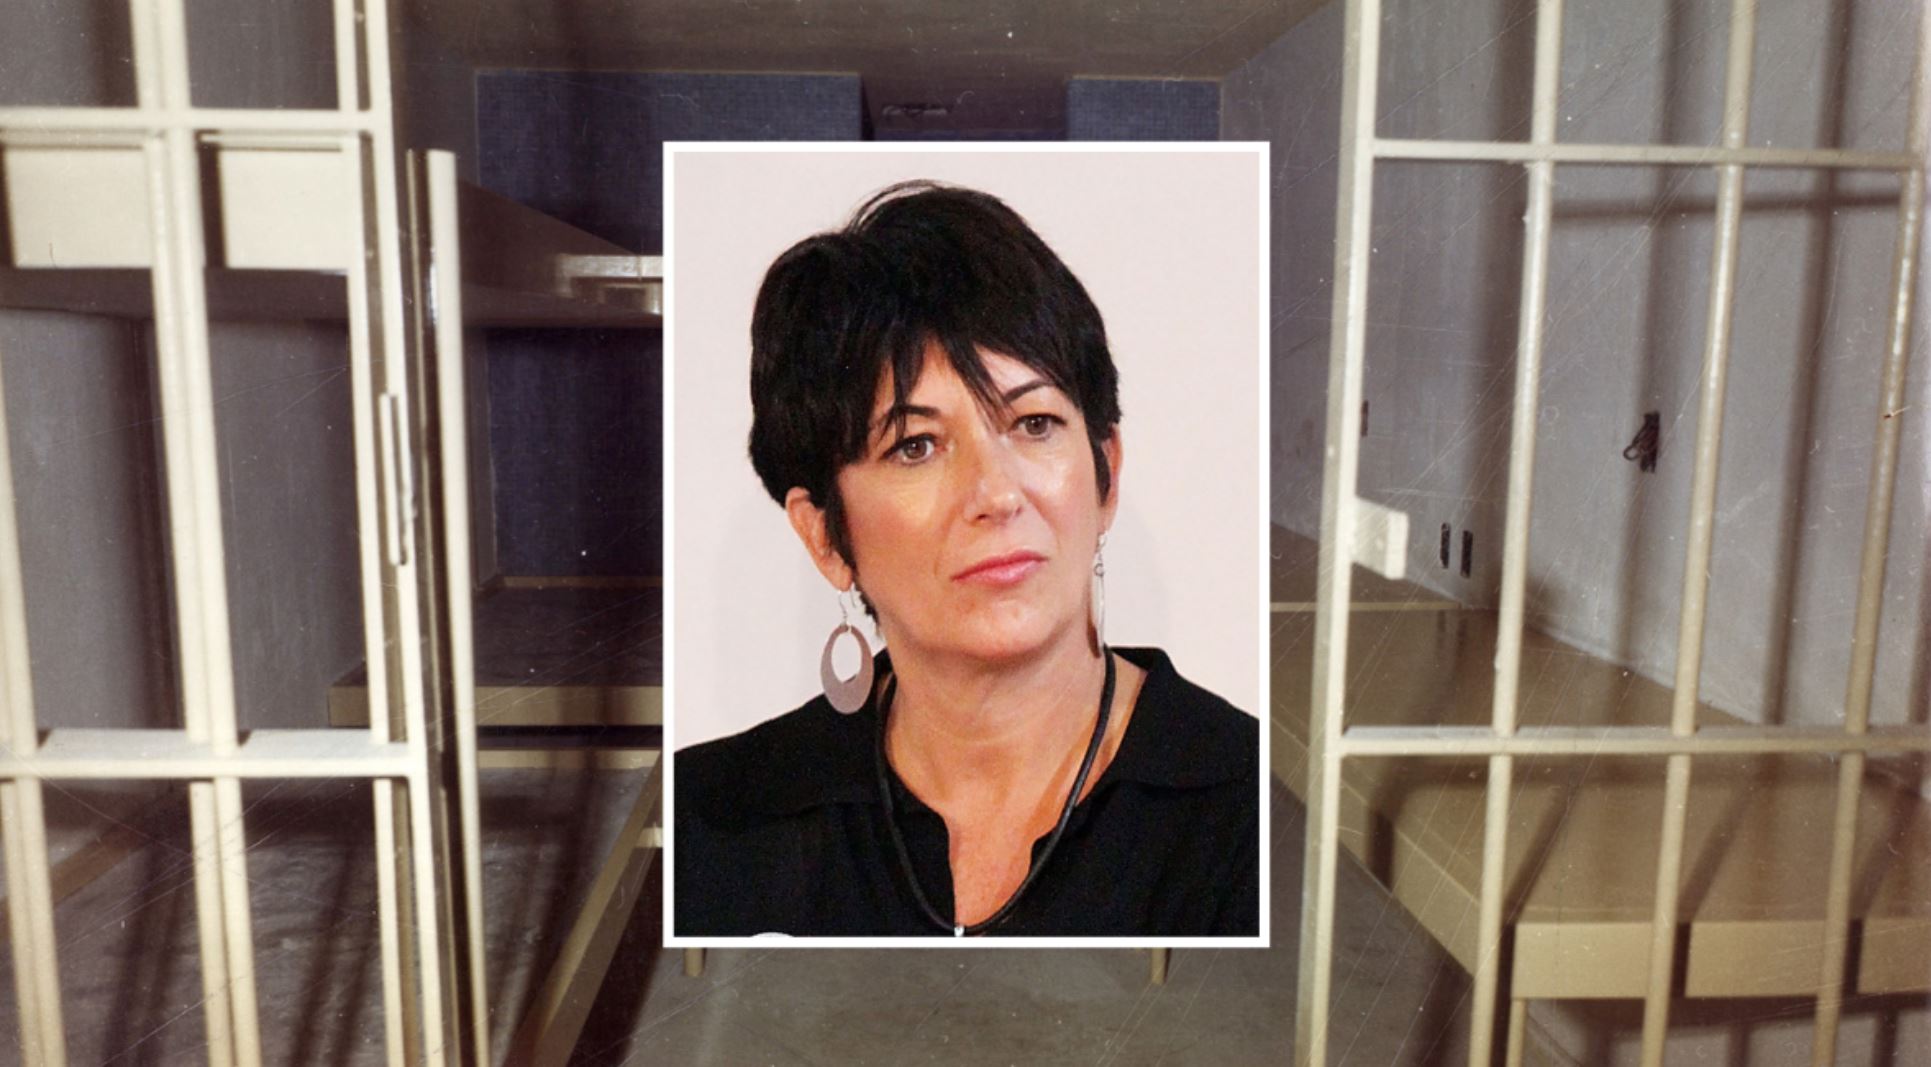 Ghislaine Maxwell to Stay in Prison Until Trial After Bail Request